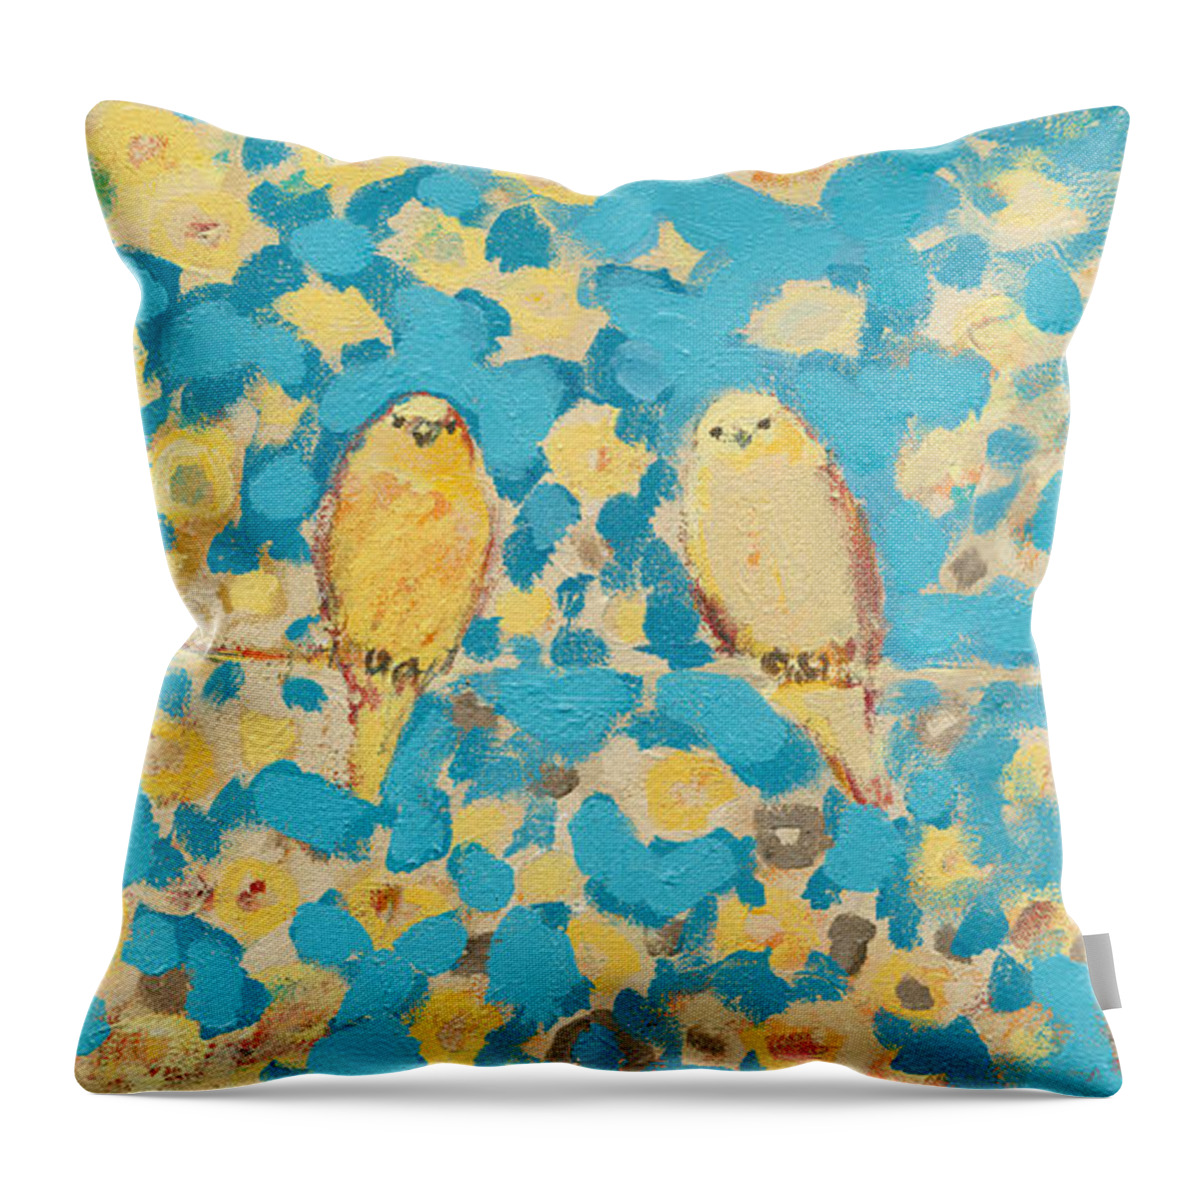 Impressionist Throw Pillow featuring the painting Sharing a Sunny Perch by Jennifer Lommers